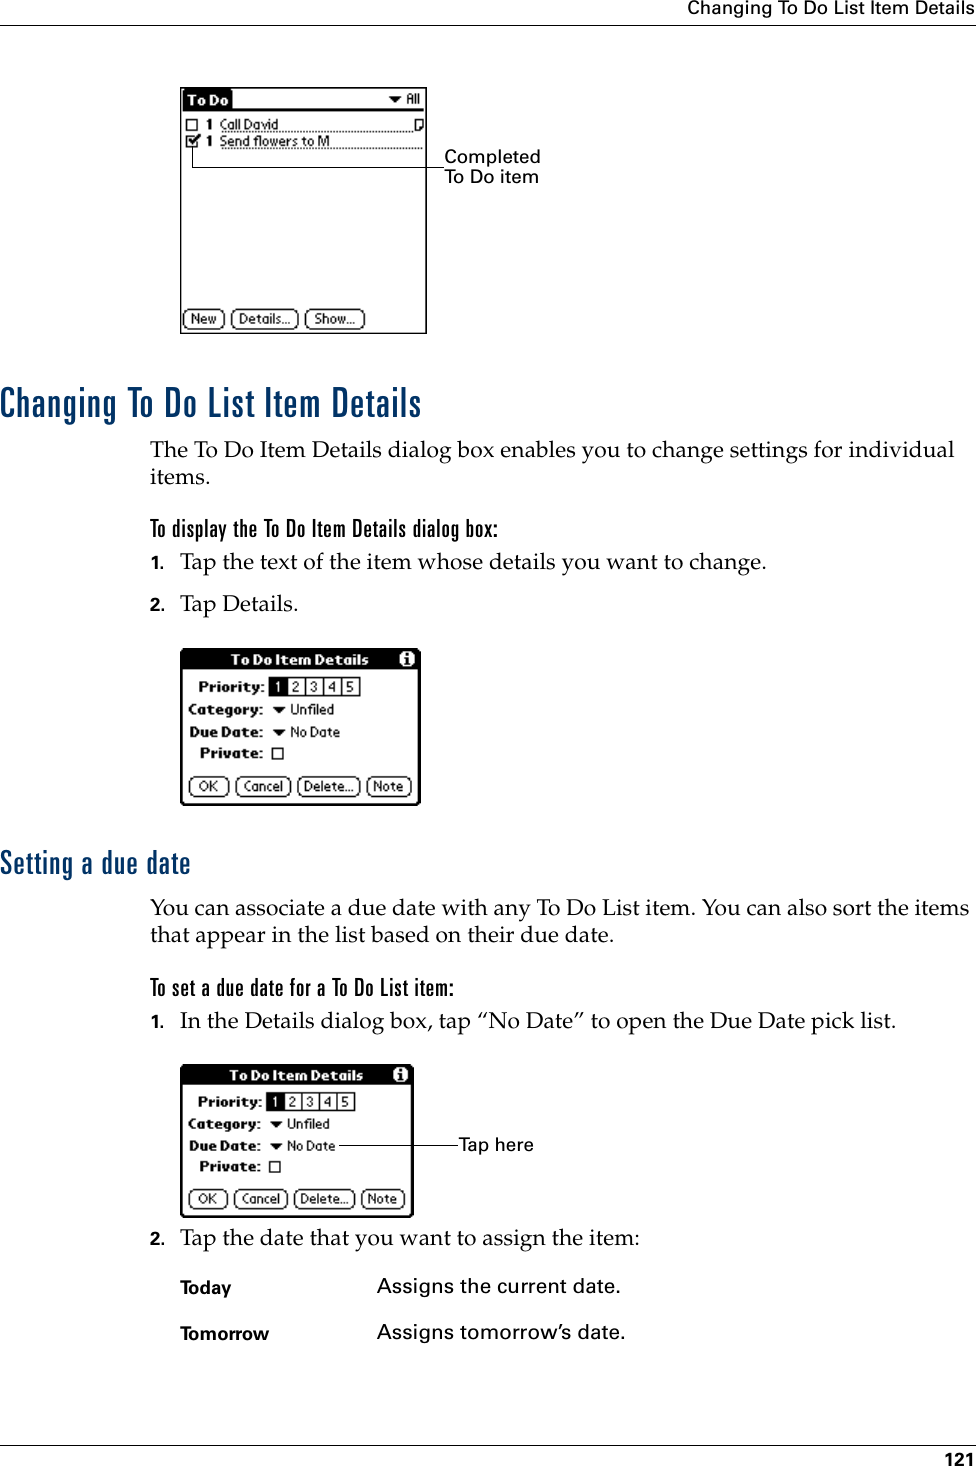 Changing To Do List Item Details121Changing To Do List Item DetailsThe To Do Item Details dialog box enables you to change settings for individual items. To display the To Do Item Details dialog box:1. Tap the text of the item whose details you want to change.2. Tap Details.Setting a due dateYou can associate a due date with any To Do List item. You can also sort the items that appear in the list based on their due date.To set a due date for a To Do List item:1. In the Details dialog box, tap “No Date” to open the Due Date pick list.2. Tap the date that you want to assign the item:Completed To Do itemToday Assigns the current date.To m o r r o w Assigns tomorrow’s date.Ta p  h e r e